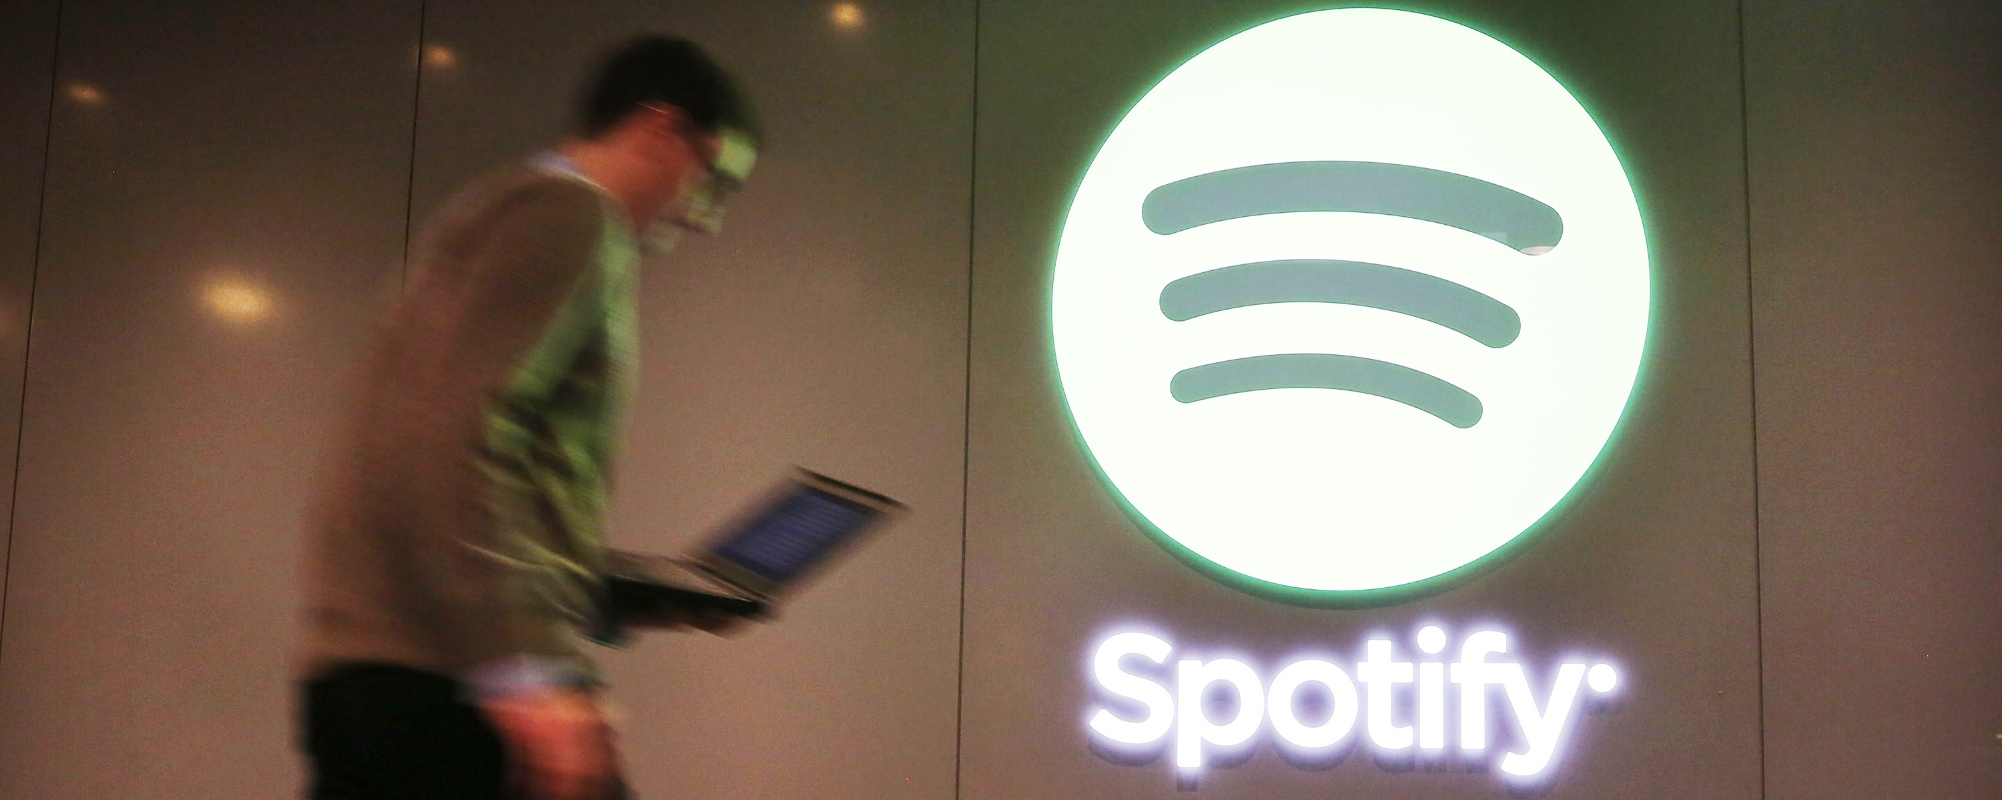 Spotify is Laying Off a Significant Amount of Its Staff After Investing Too Much in Past Years